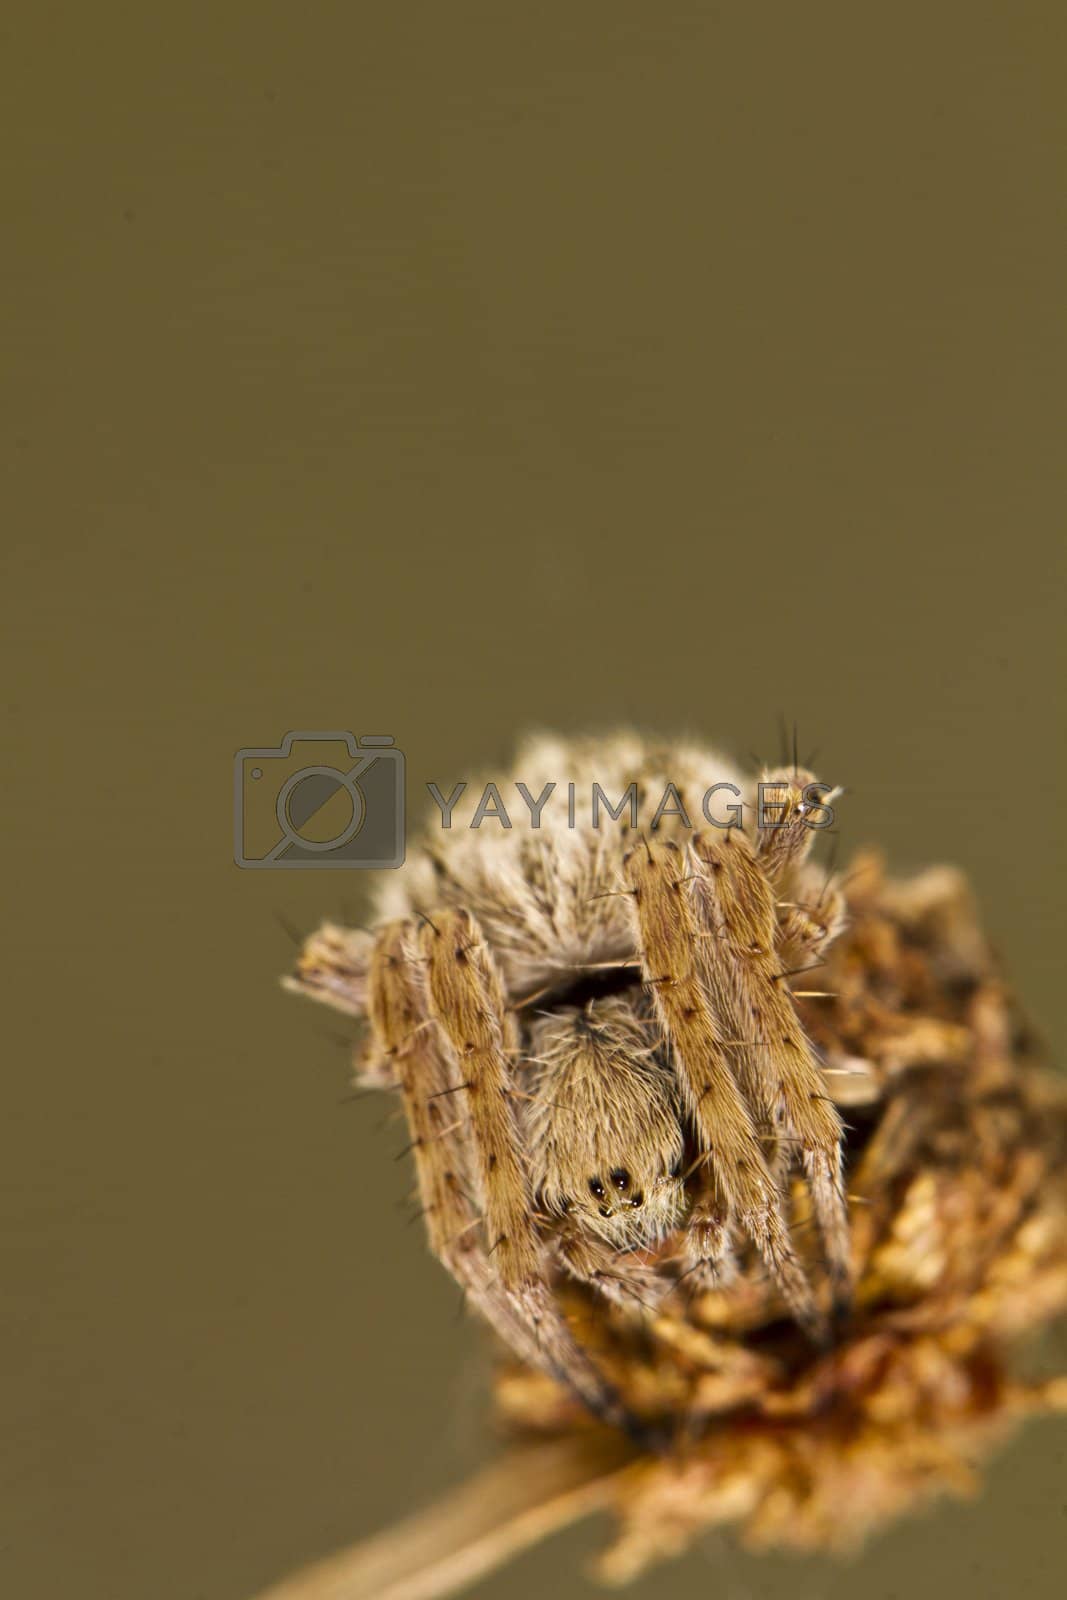 Royalty free image of spider on attack position by membio